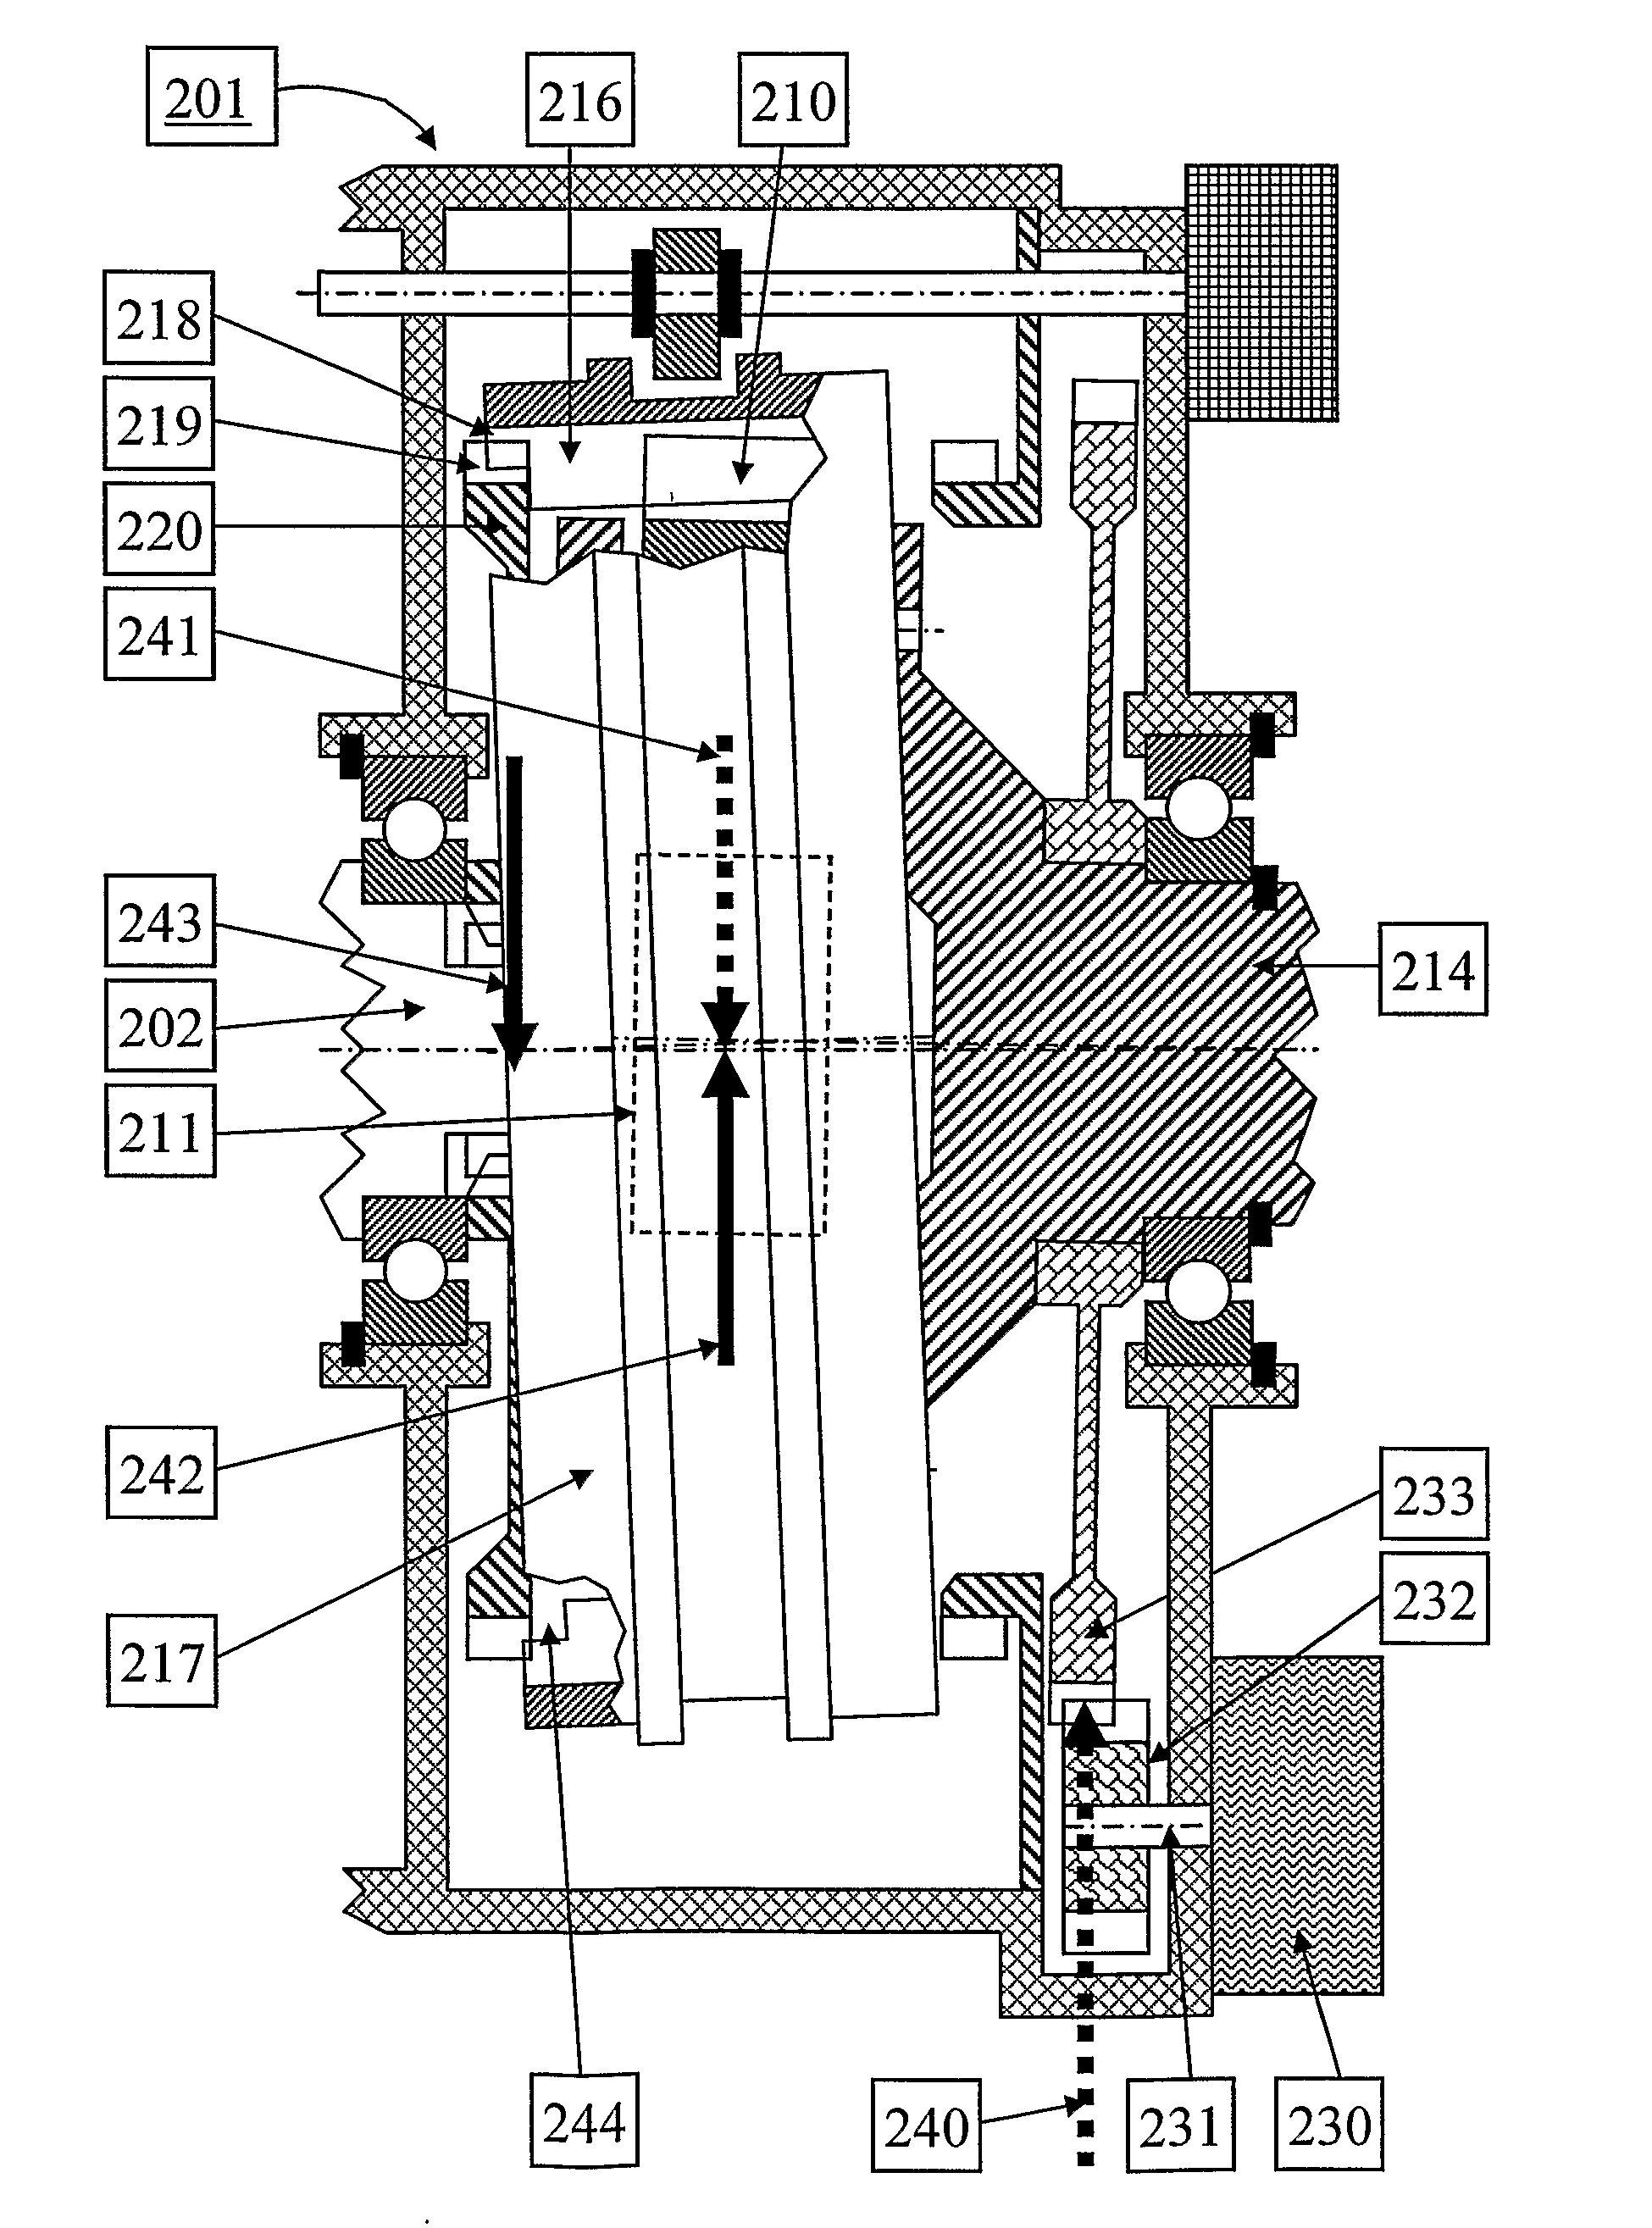 System for preventing gear hopout in a tooth clutch in a vehicle transmission